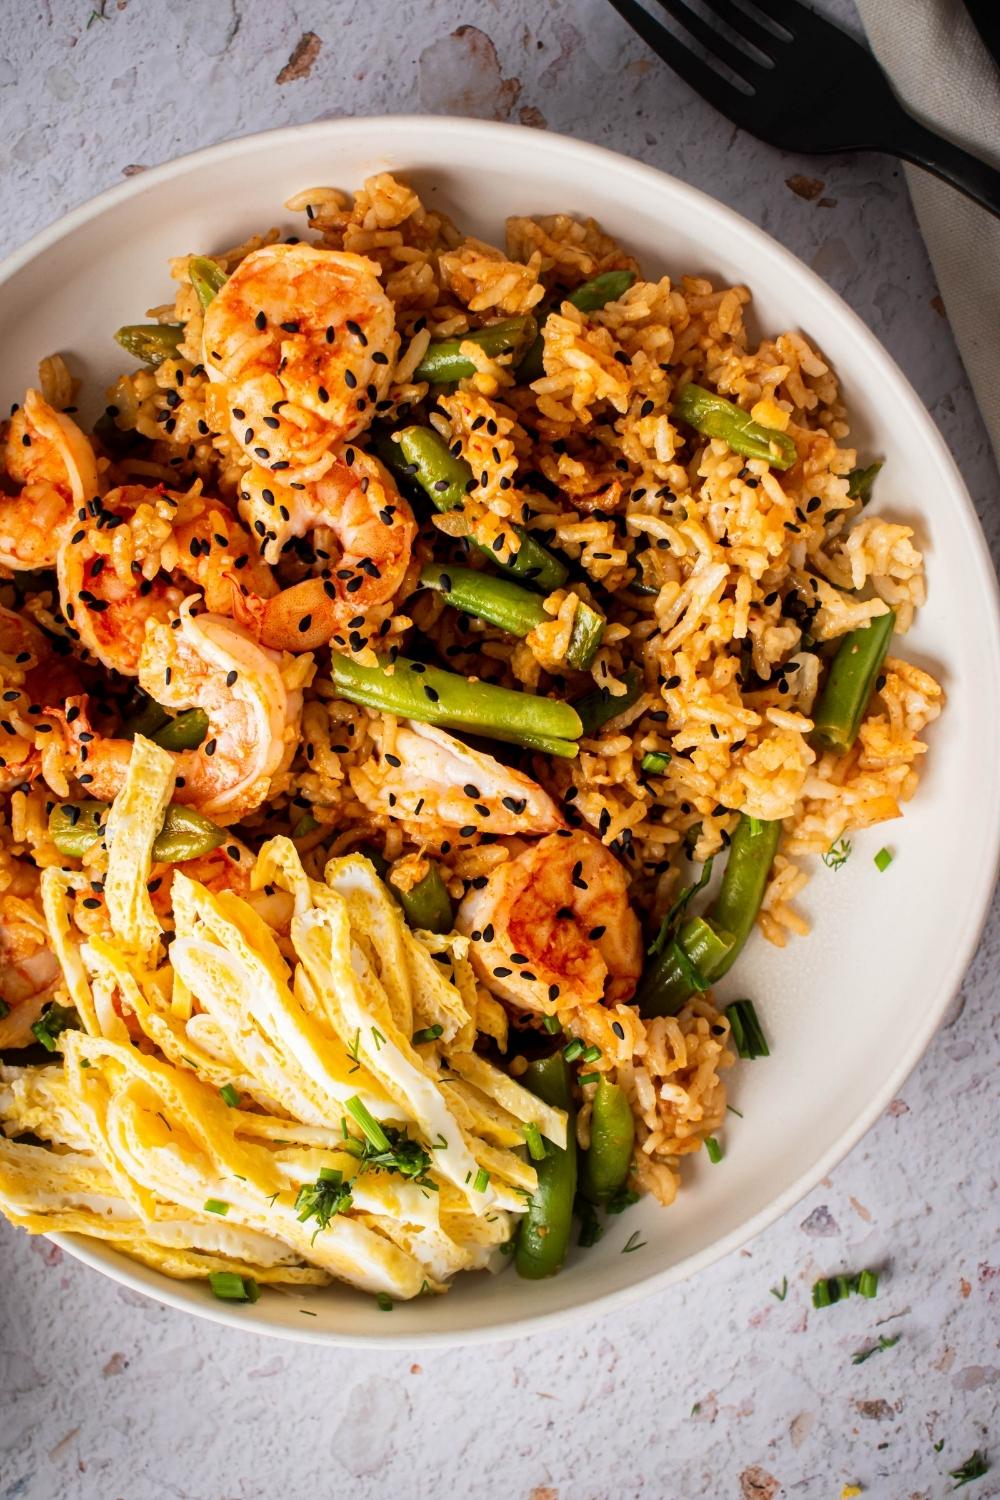 An overhead, close-up view of a bowl of Cajun Fried Rice with green beans, shrimp, and egg.